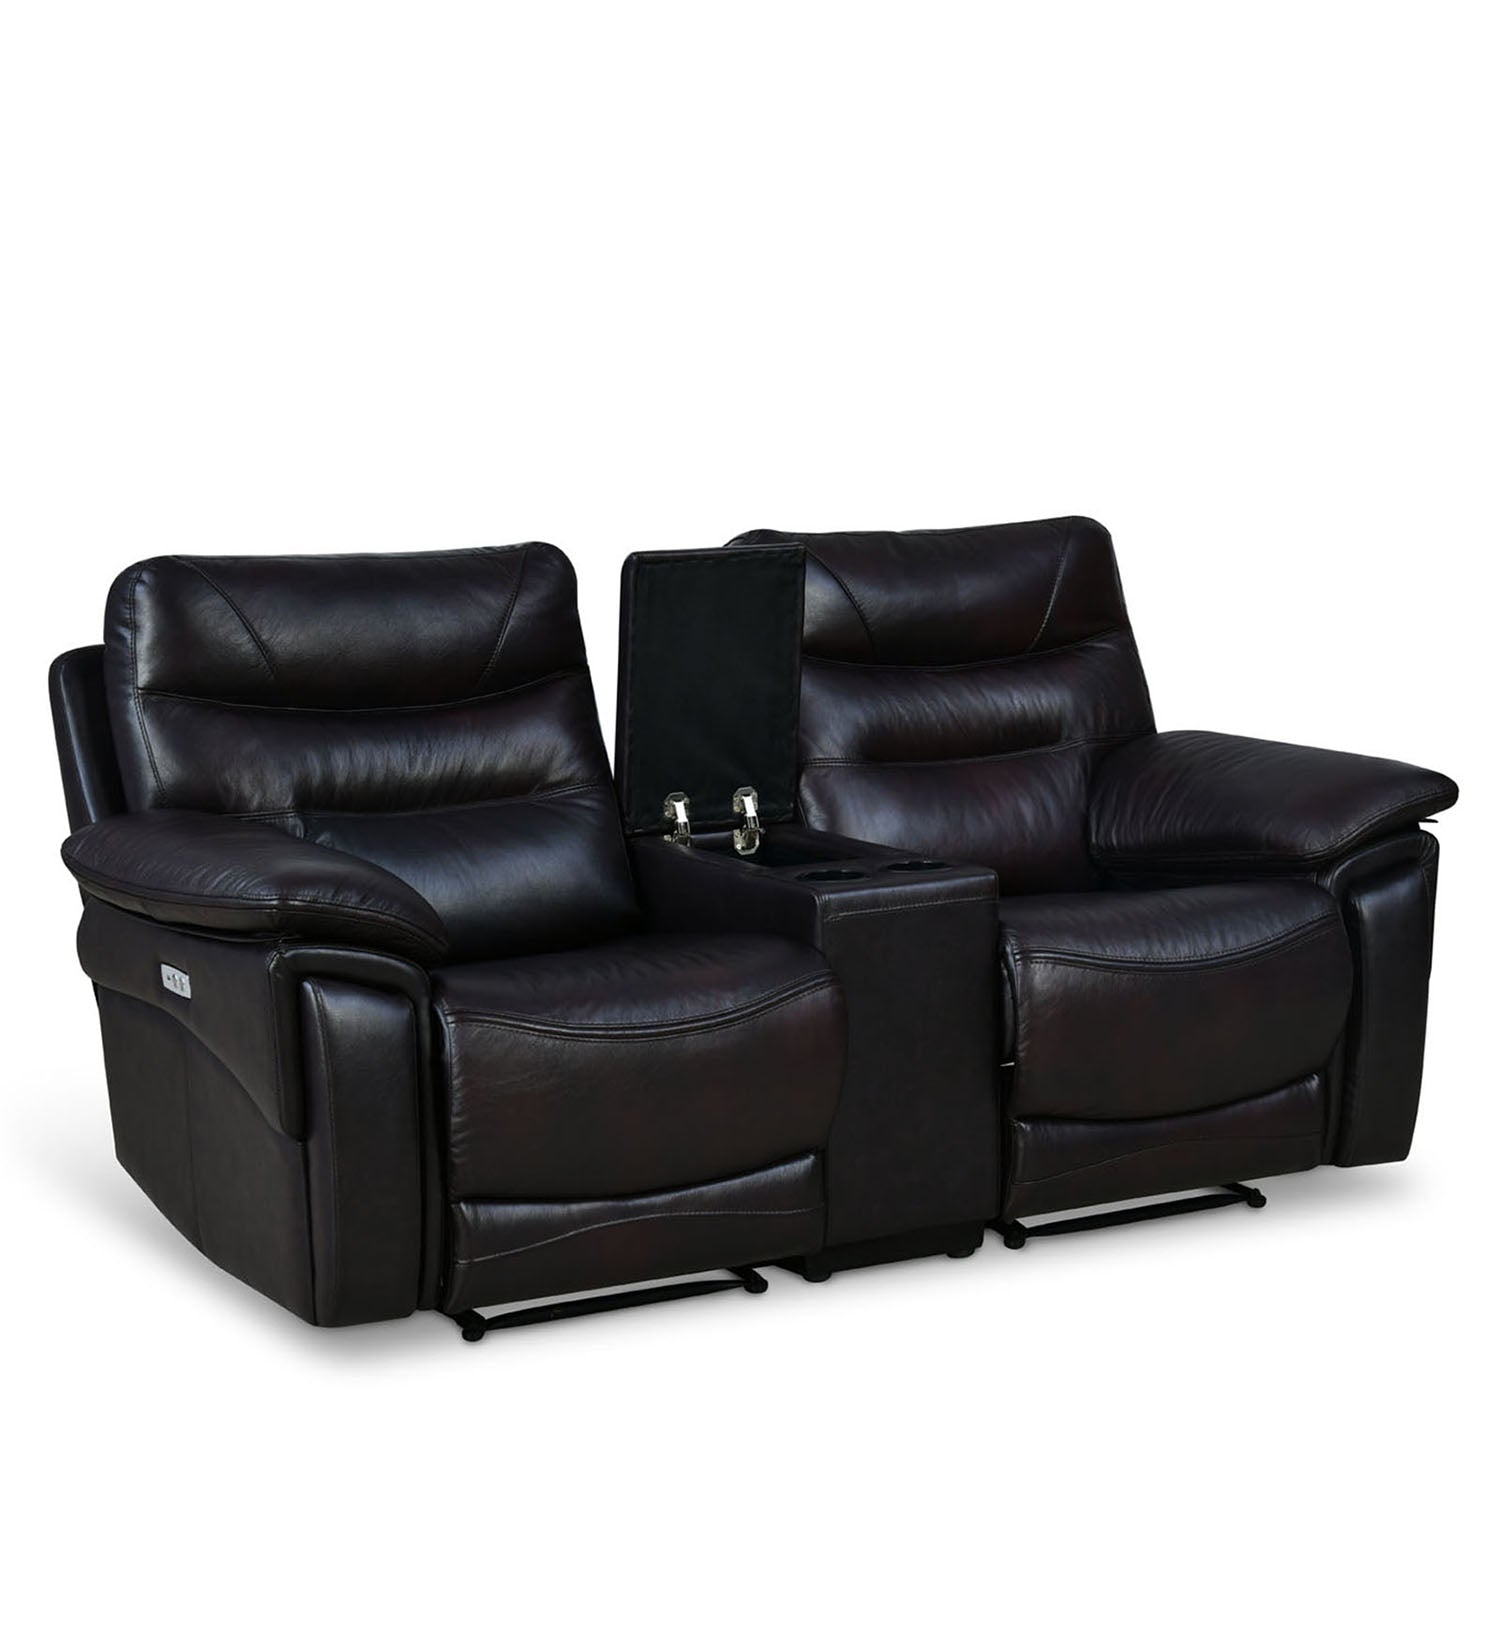 Bakewell 2 Seater Leather Powered Recliner with Console (Brown)